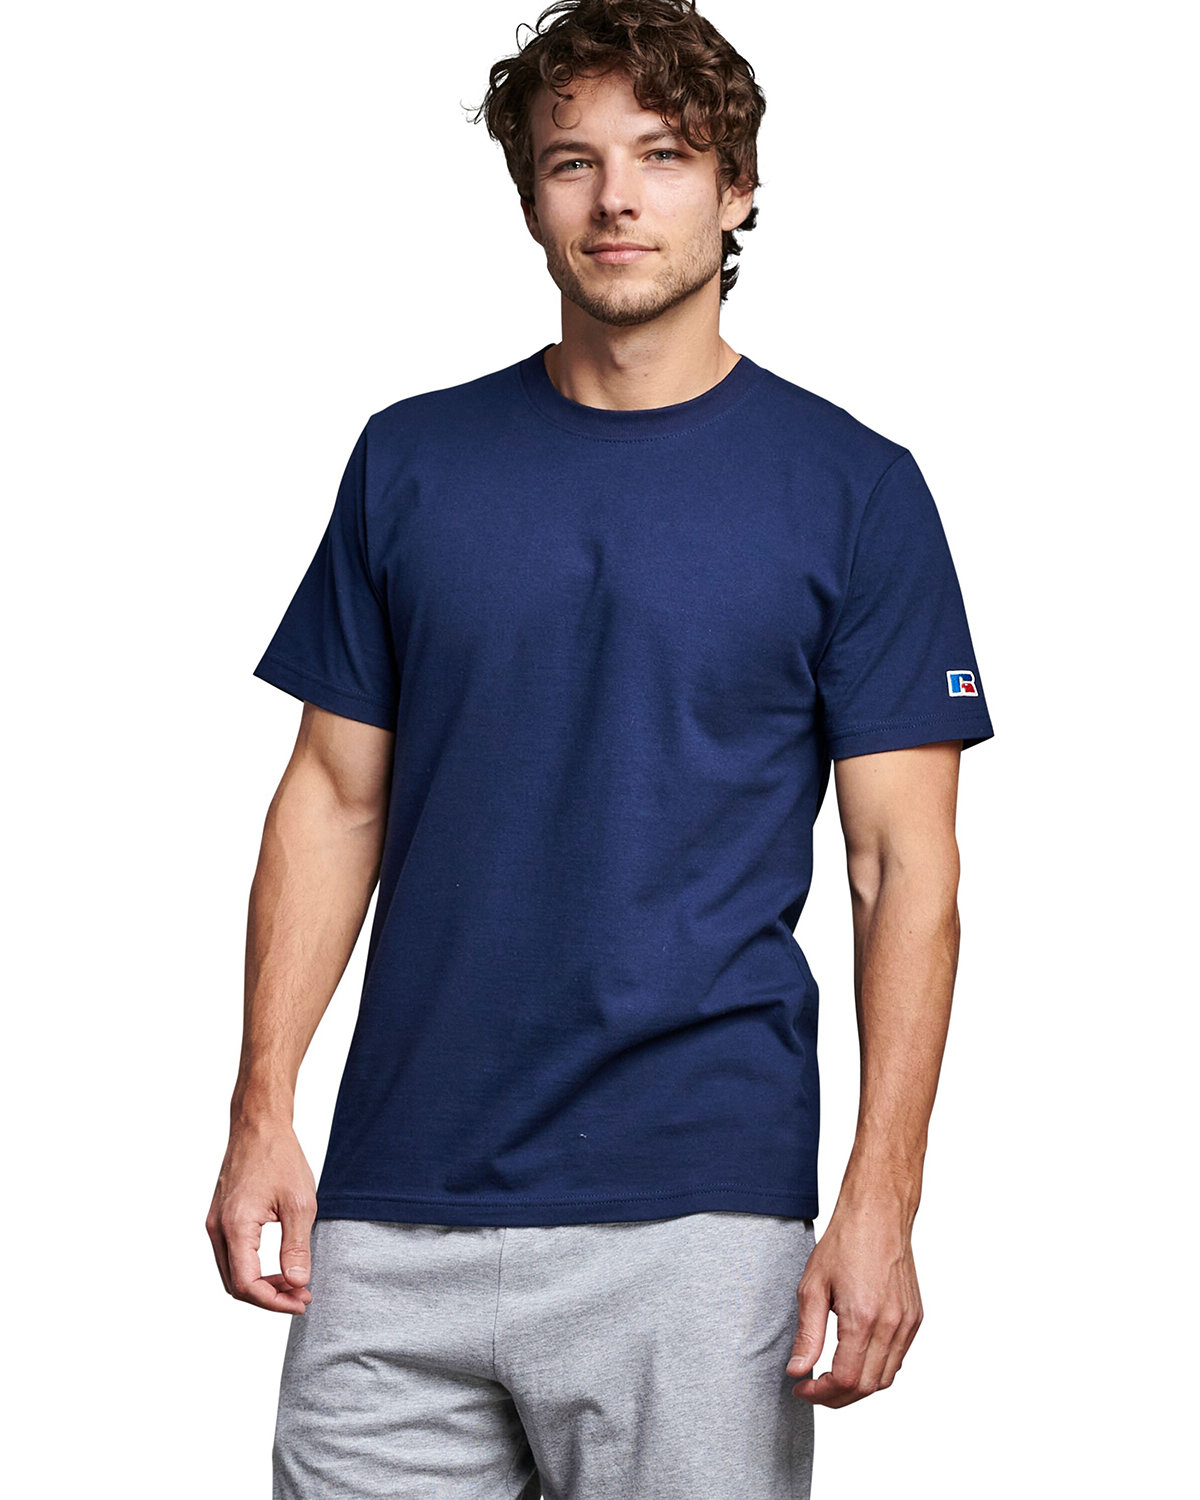 Russell Athletic Unisex Cotton Classic T-Shirt NAVY 